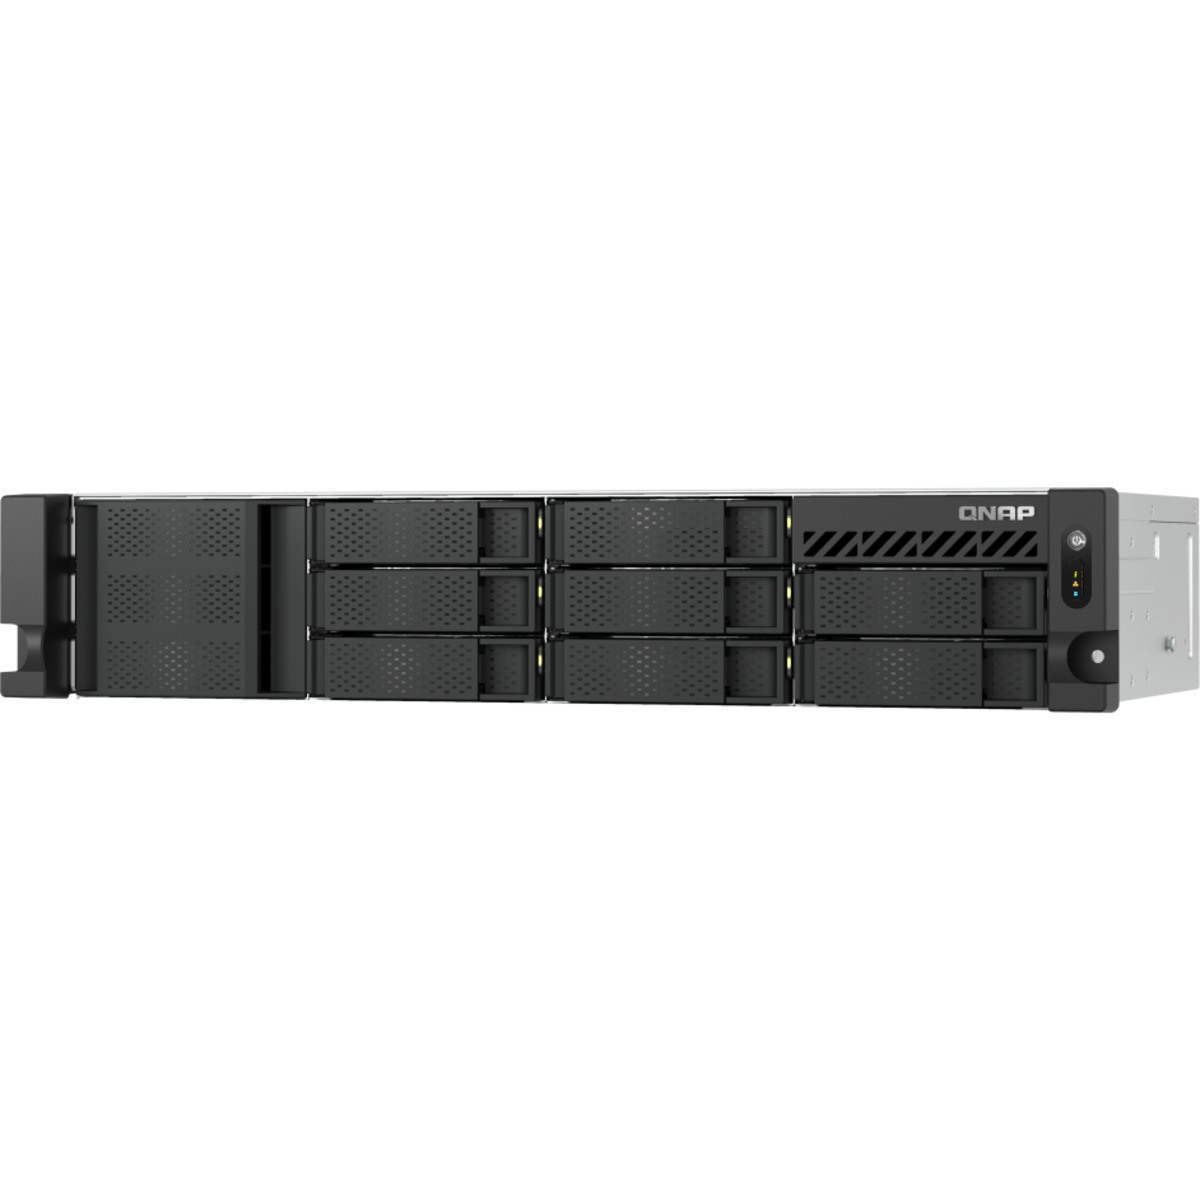 QNAP TS-855eU-RP 64tb 8-Bay RackMount Multimedia / Power User / Business NAS - Network Attached Storage Device 8x8tb Seagate IronWolf Pro ST8000NT001 3.5 7200rpm SATA 6Gb/s HDD NAS Class Drives Installed - Burn-In Tested - ON SALE - FREE RAM UPGRADE TS-855eU-RP